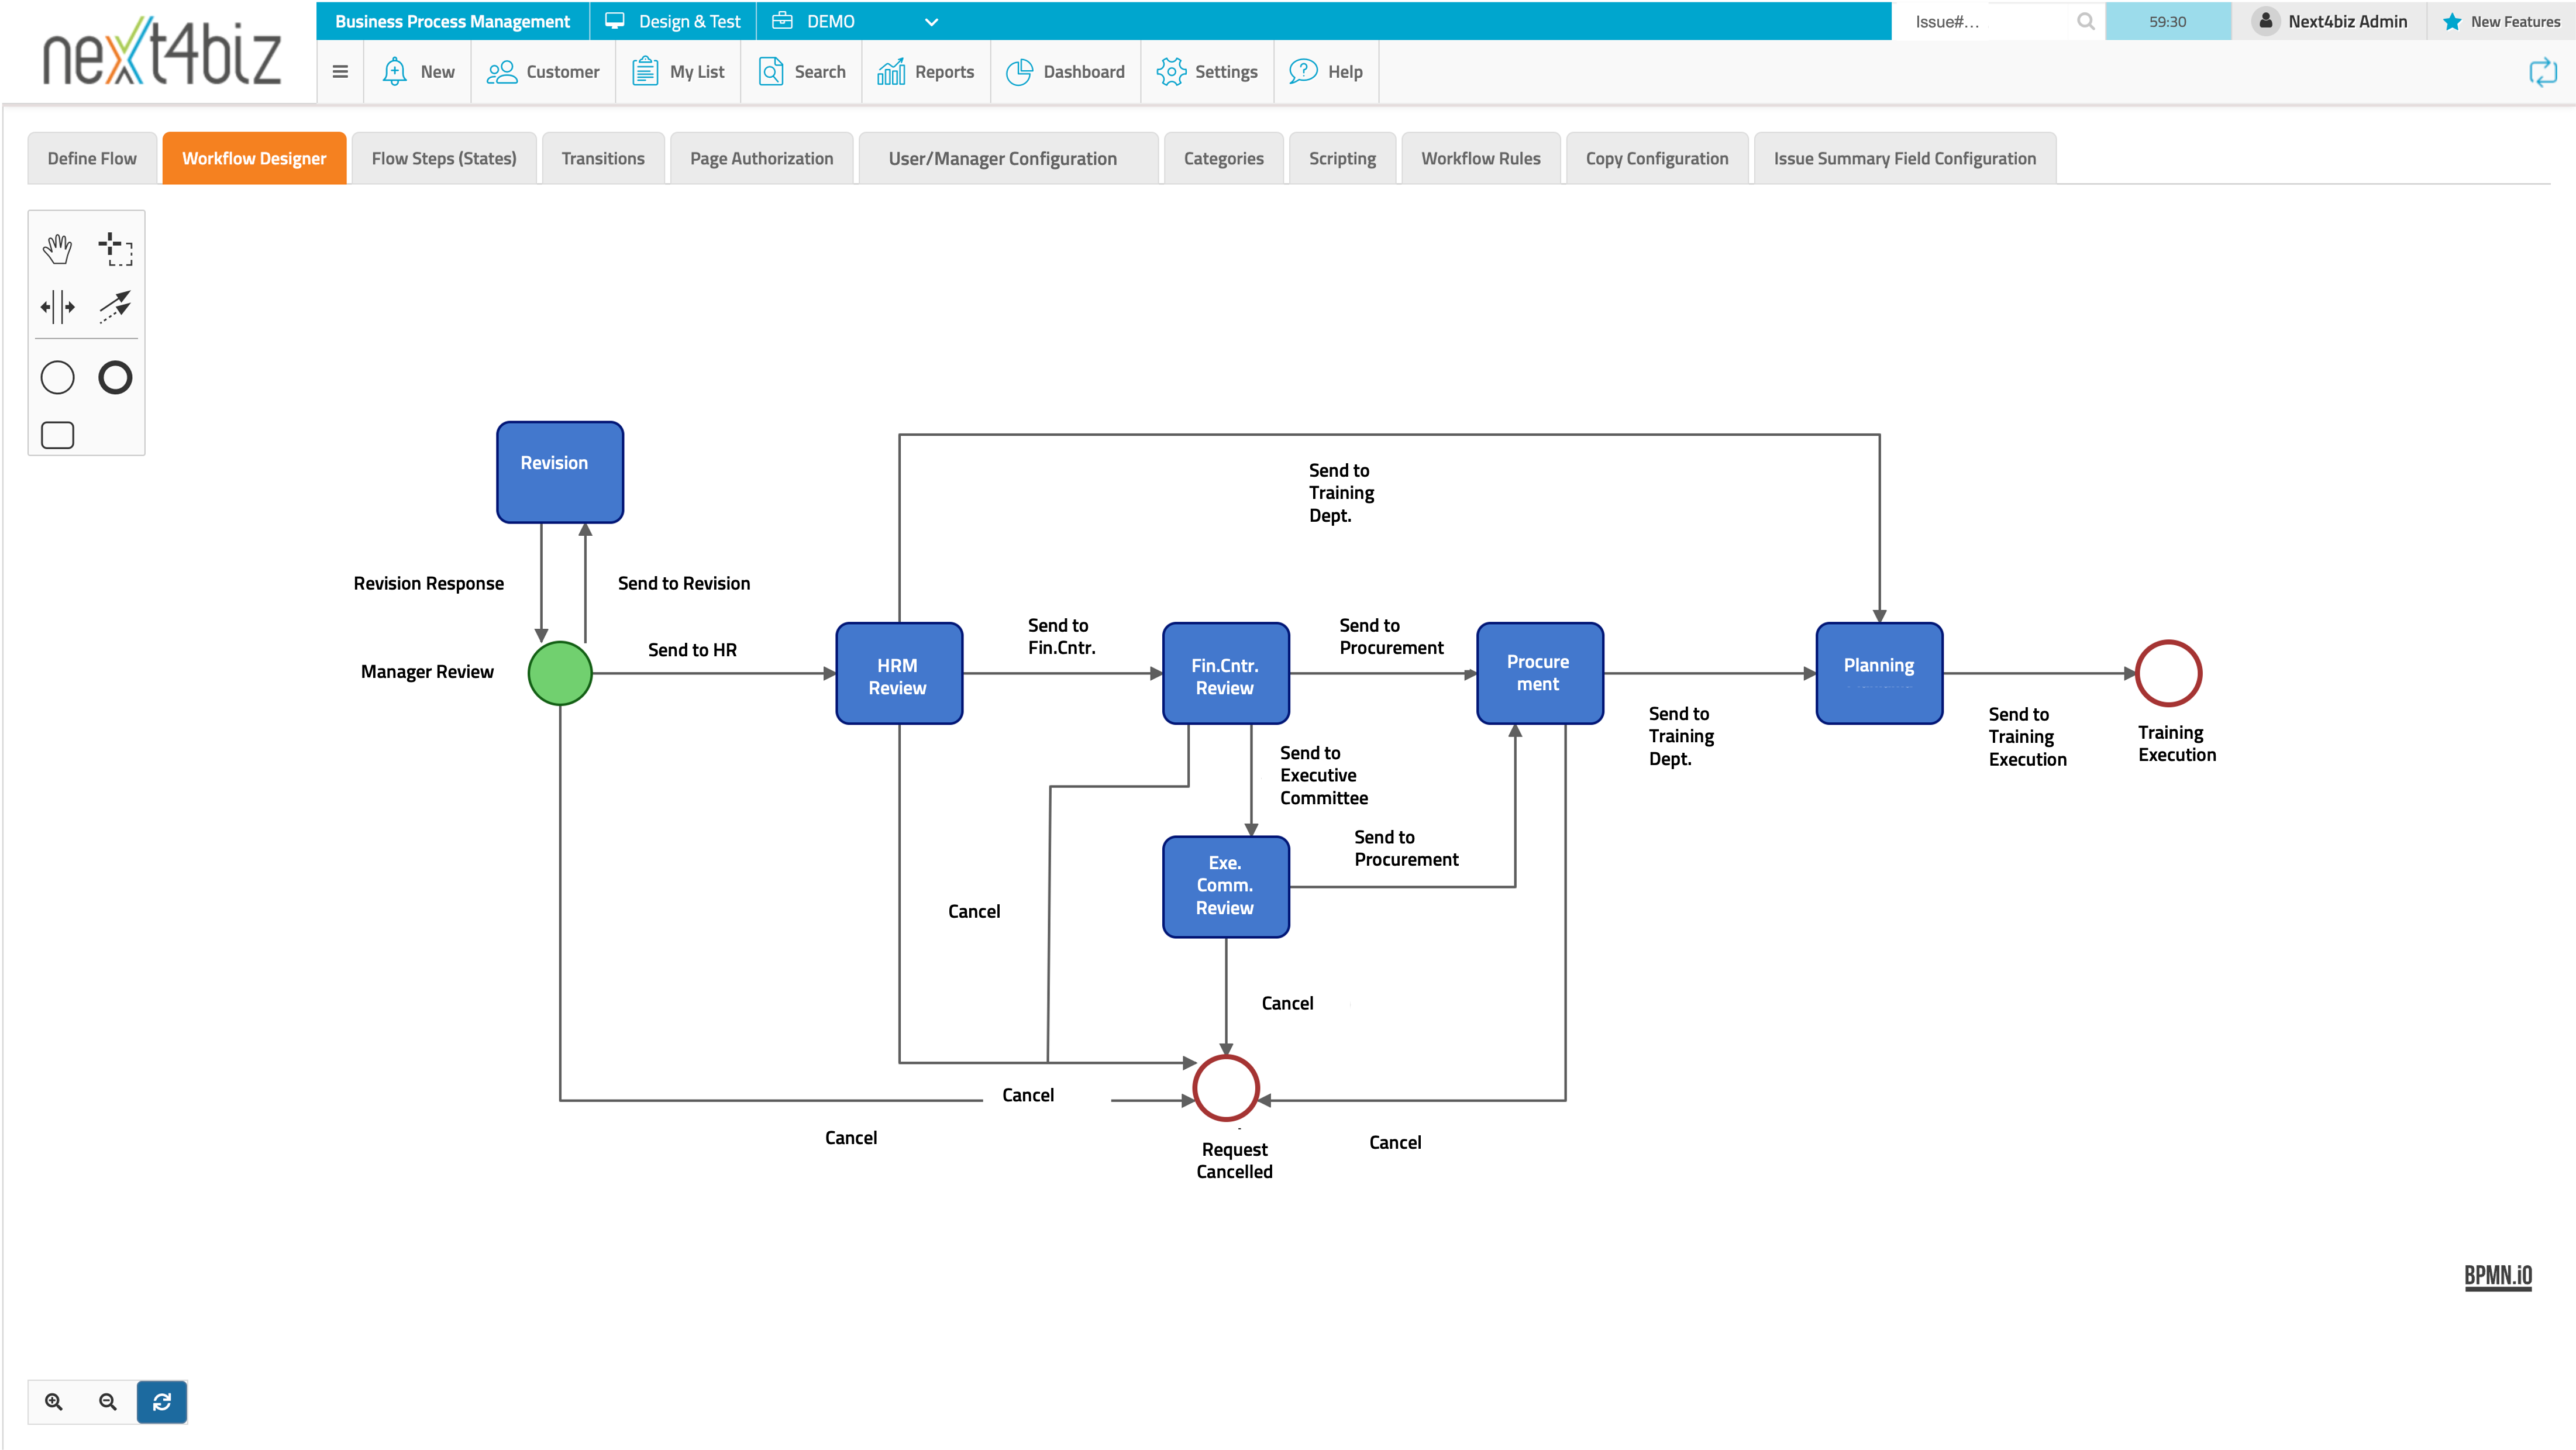 Customize you workflows with state of the art process designer.